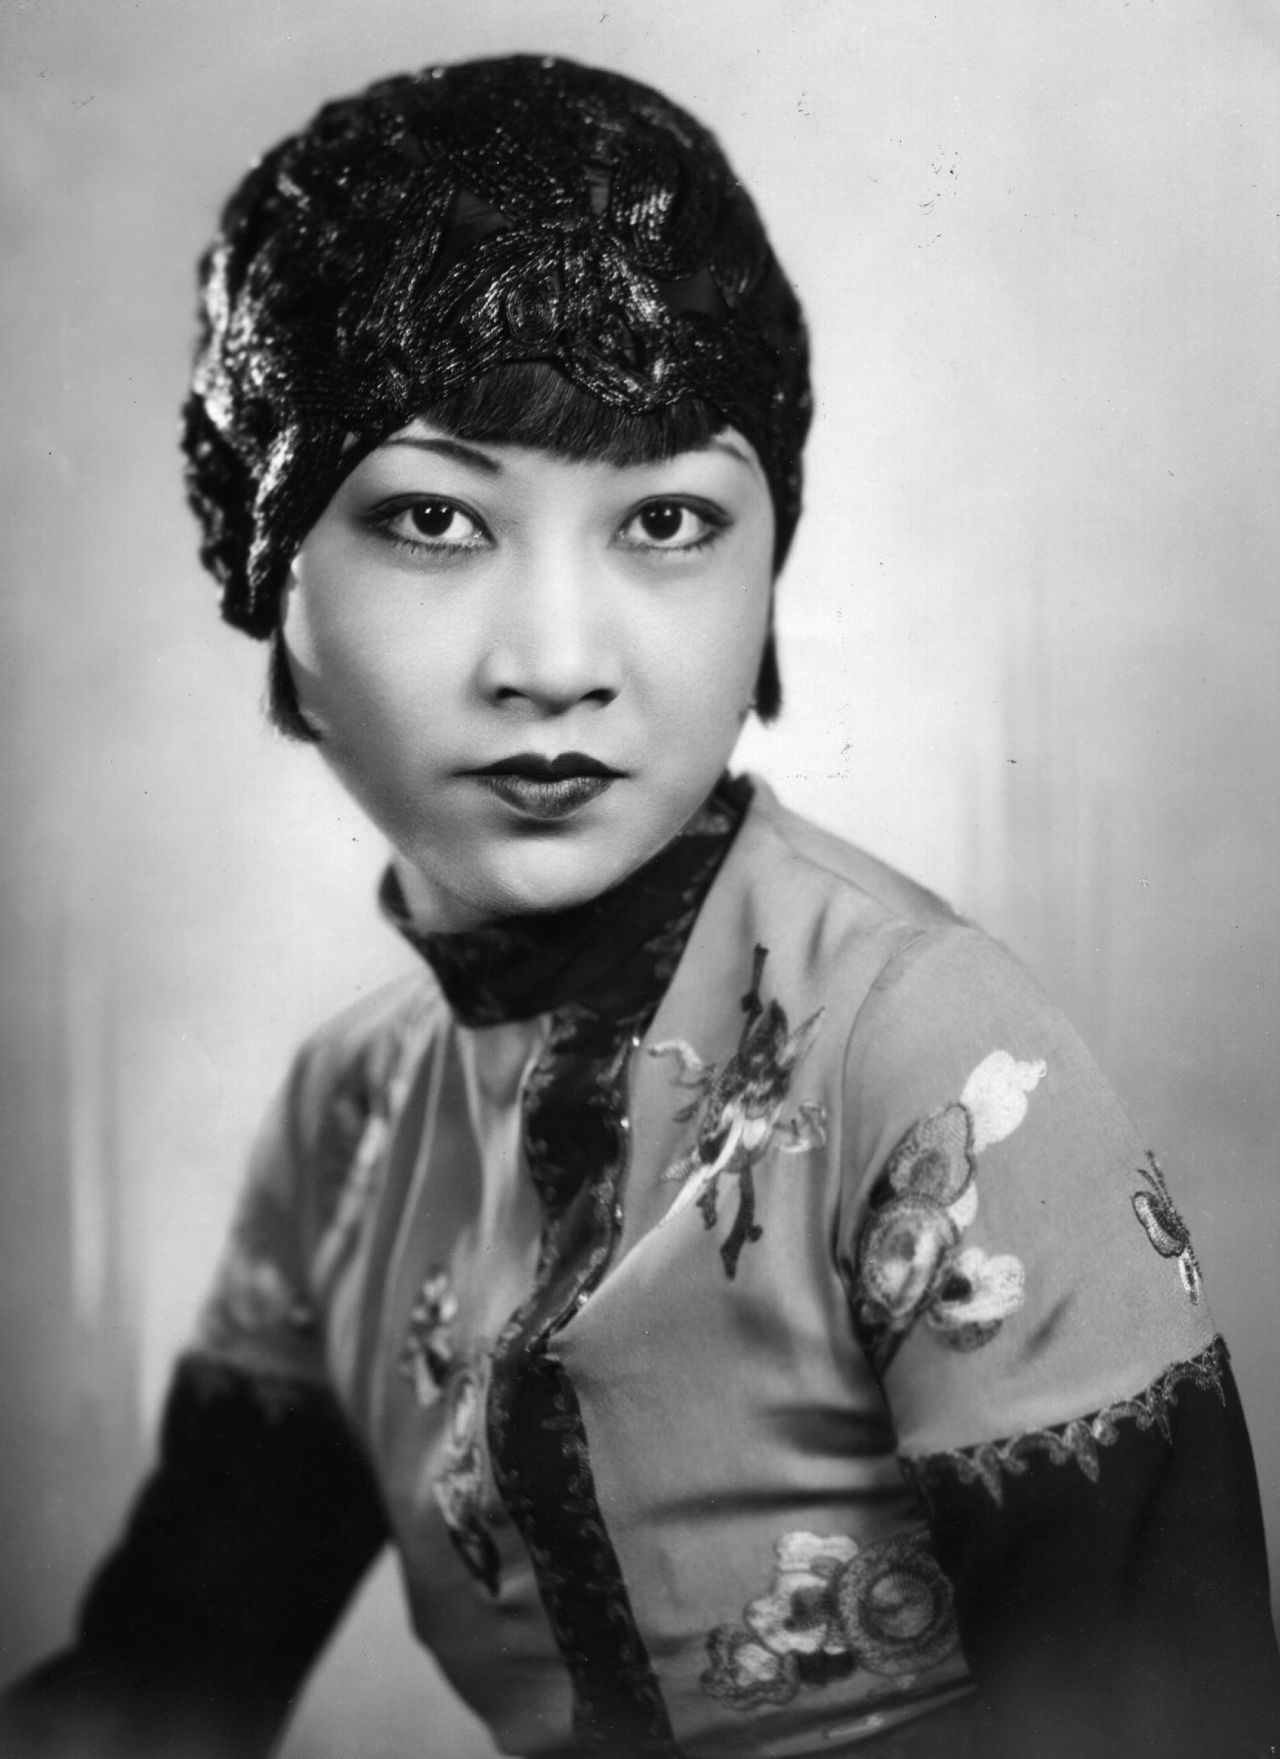 Silent film actress Anna May Wong was known for her taste in headscarves.